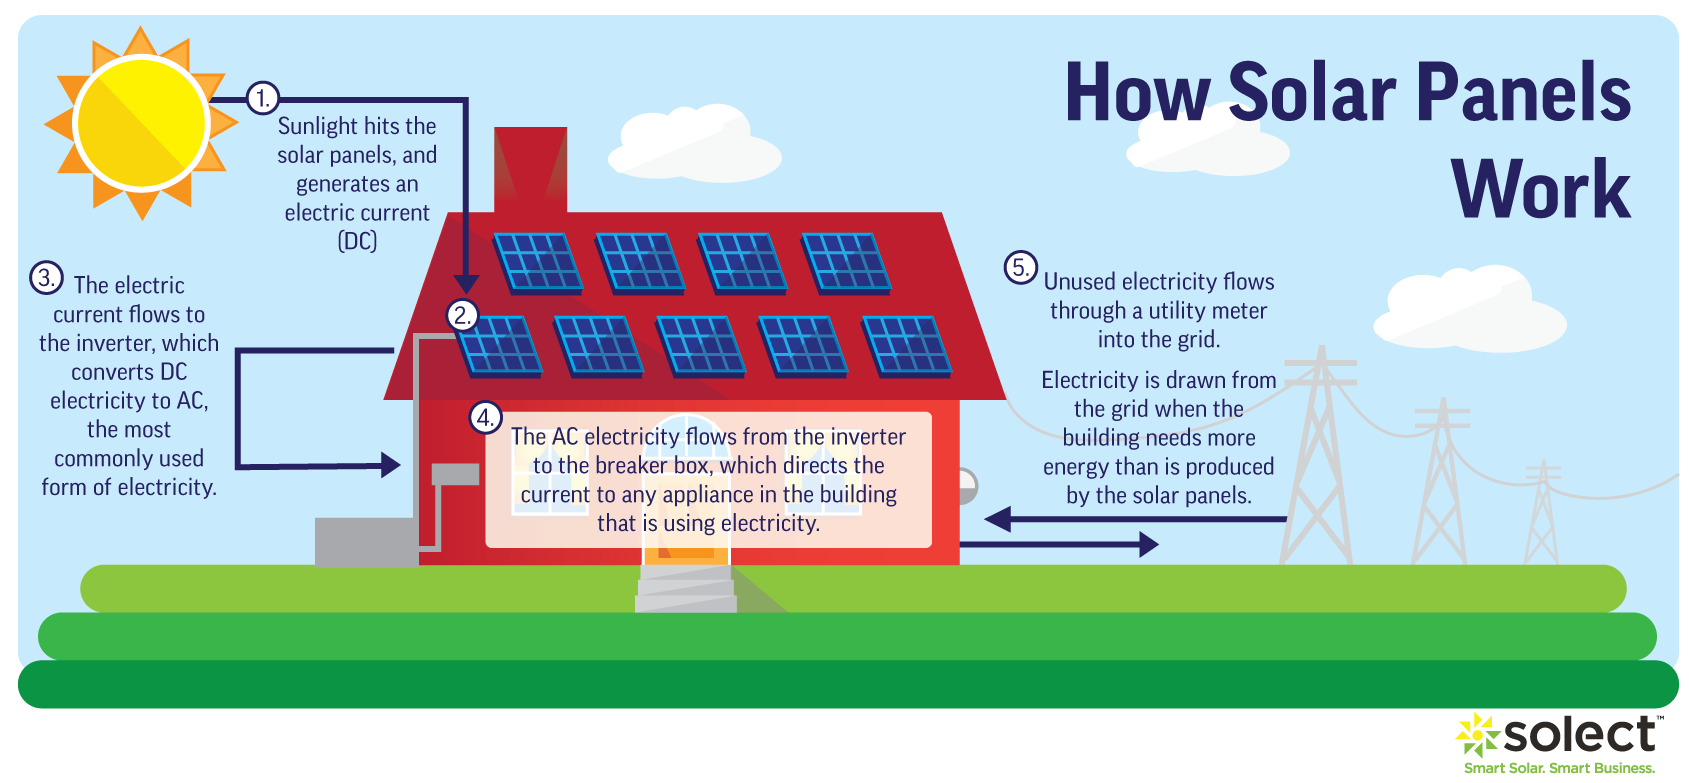 How does a solar panel work